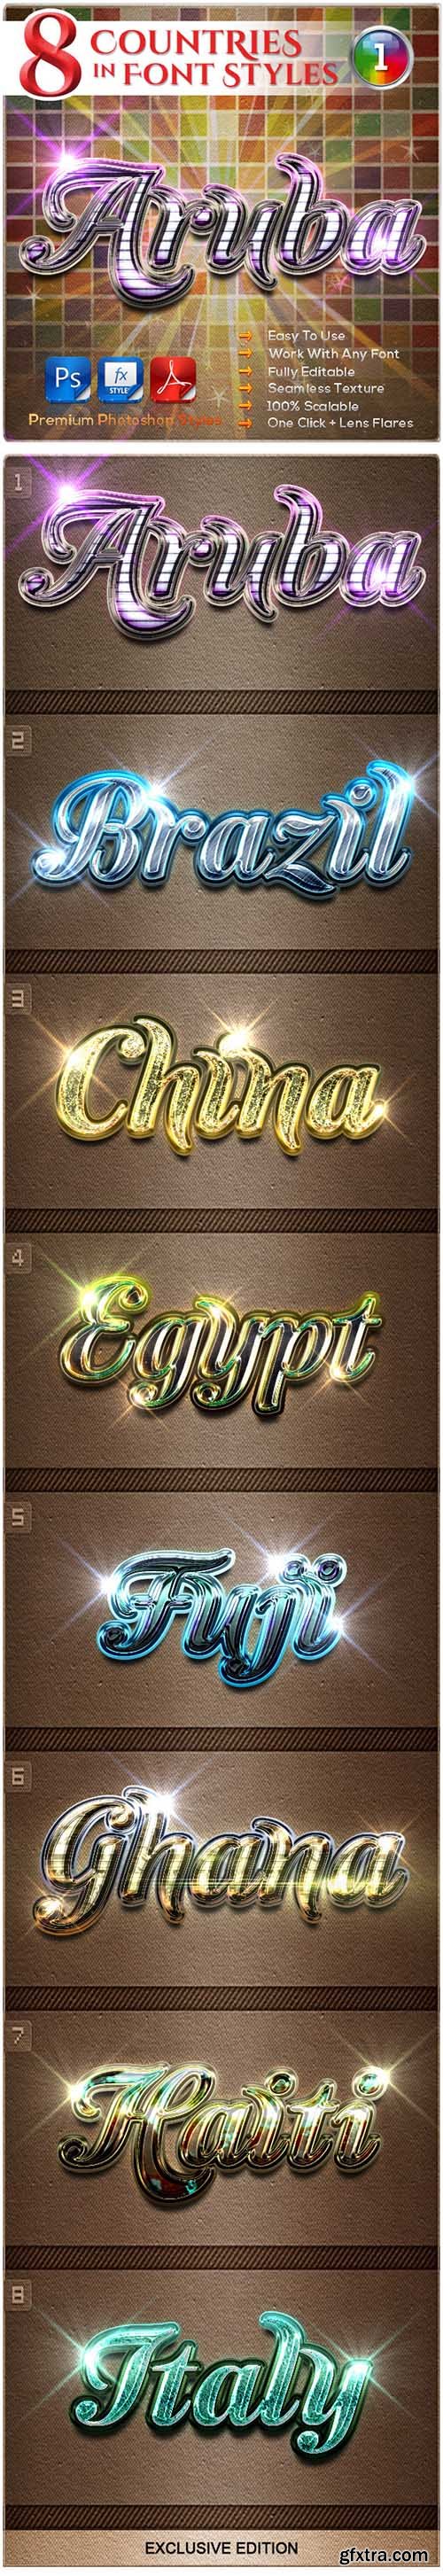 Graphicriver 8 Countries in the Font Style #1 9206629